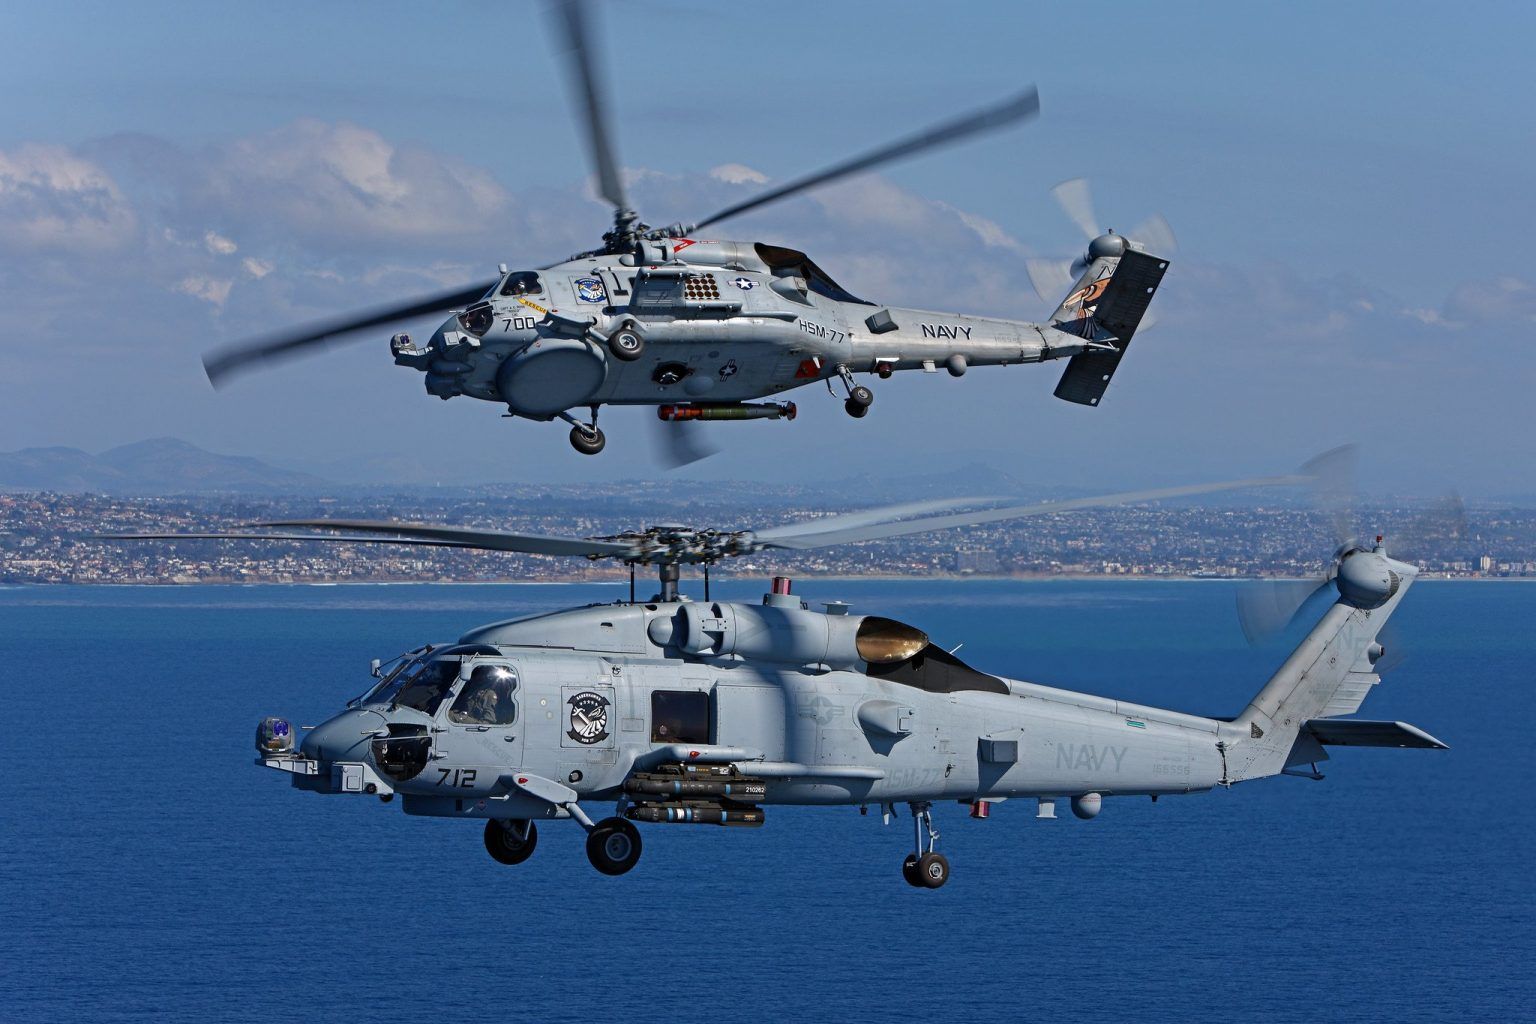 India Receives two MH-60R Seahawk helicopters from the US